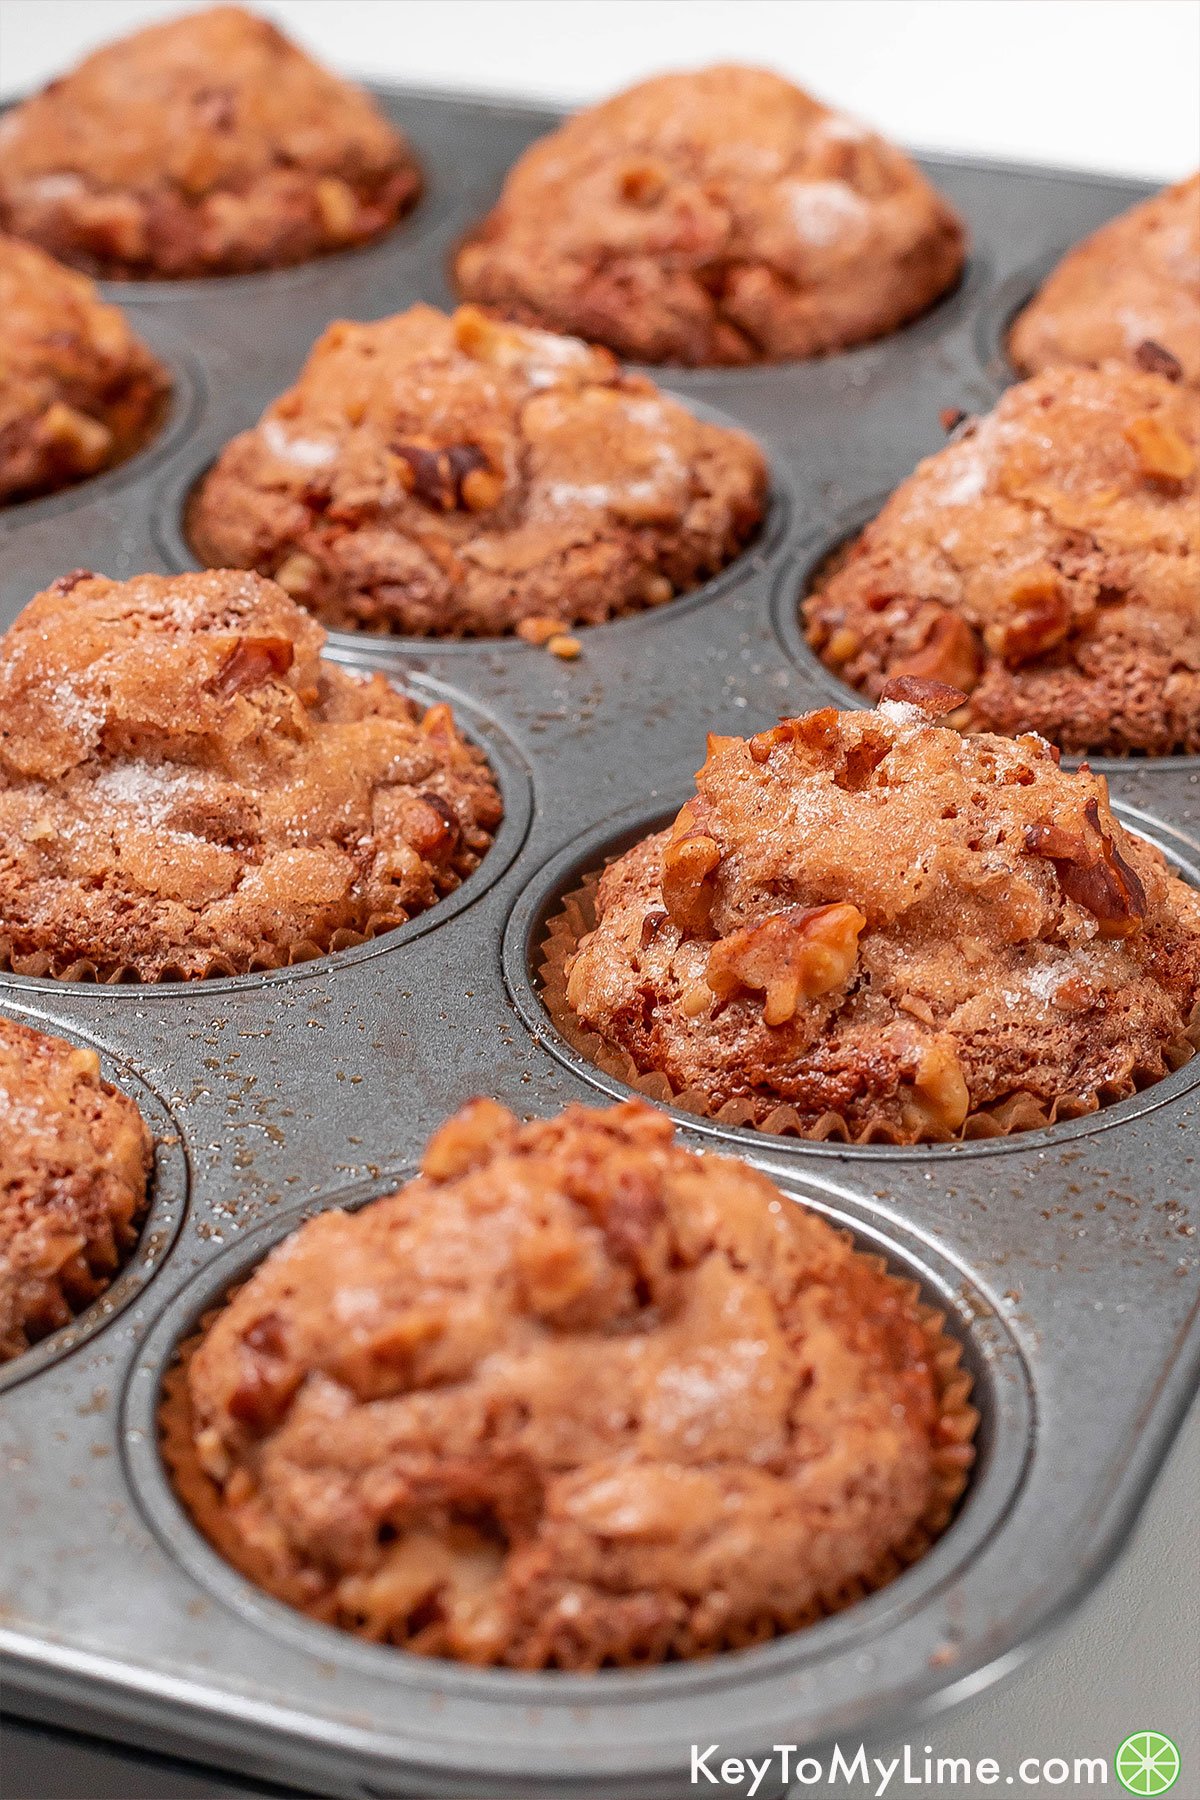 Side shot of banana muffins in a baking tin showing the sugary crunchy topping.